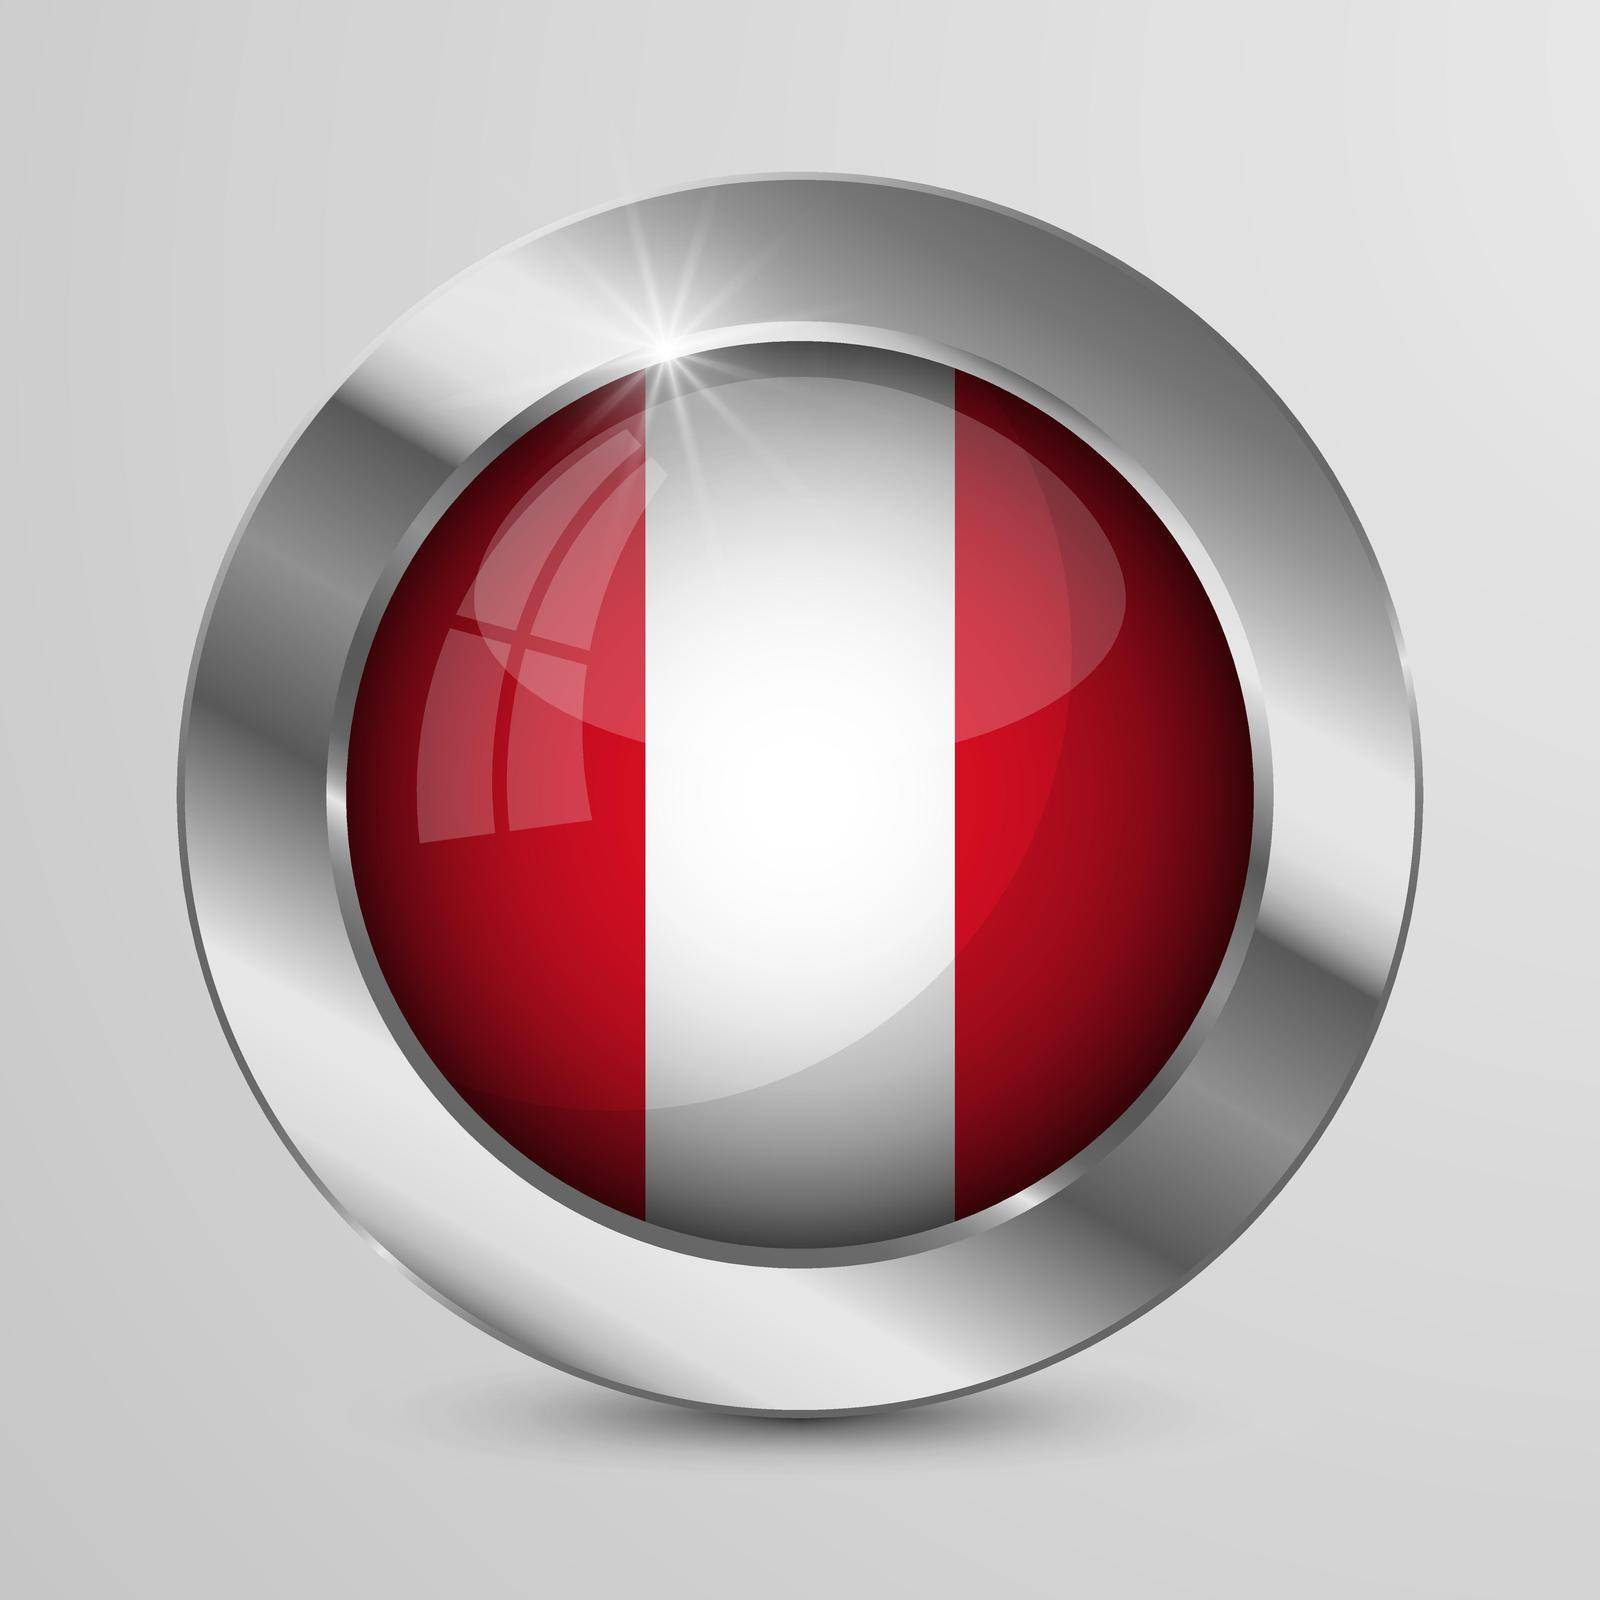 EPS10 Vector Patriotic Button with Peru flag colors. An element of impact for the use you want to make of it.